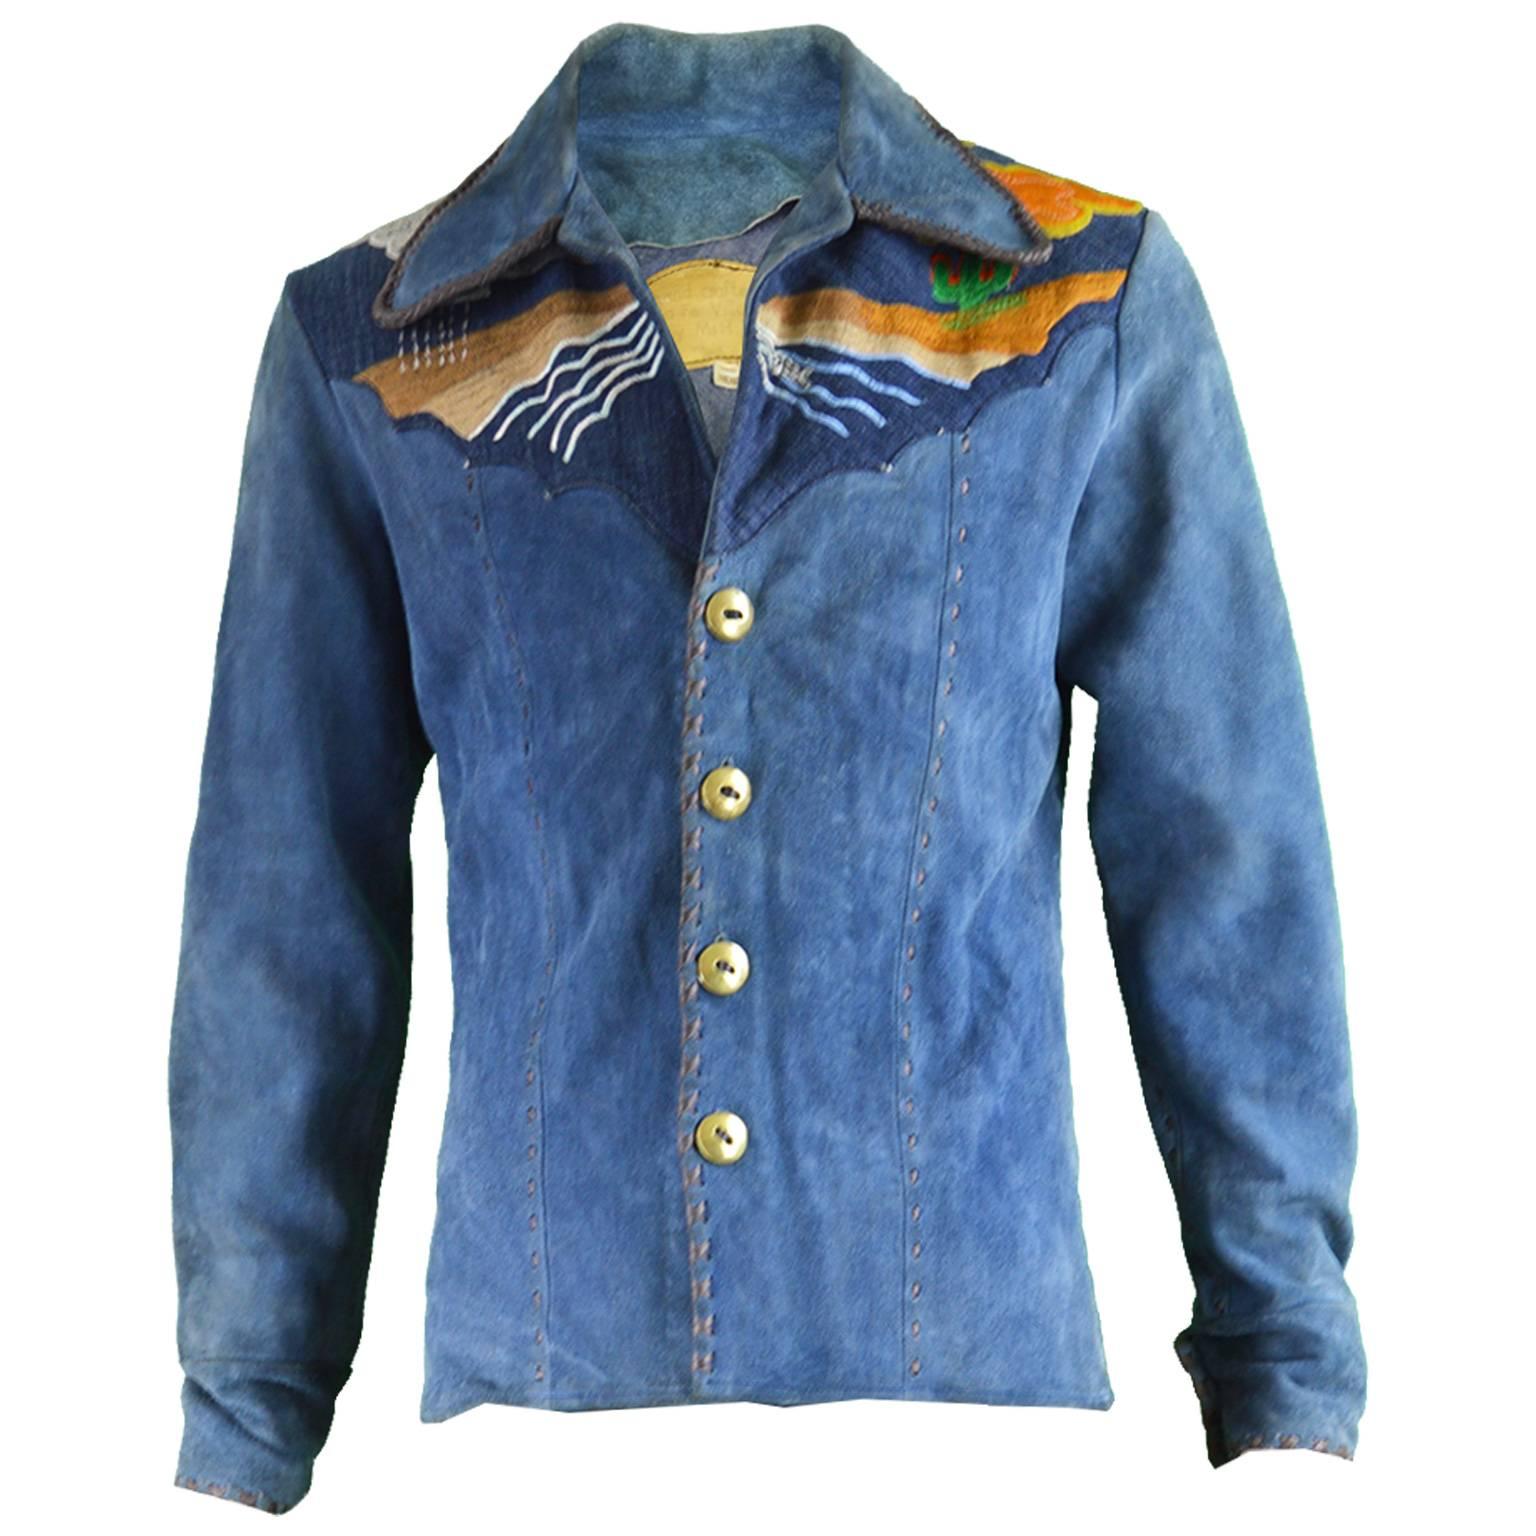 Handcrafted Mens Vintage Embroidered Whip Stitched Suede and Denim Jacket, 1970s